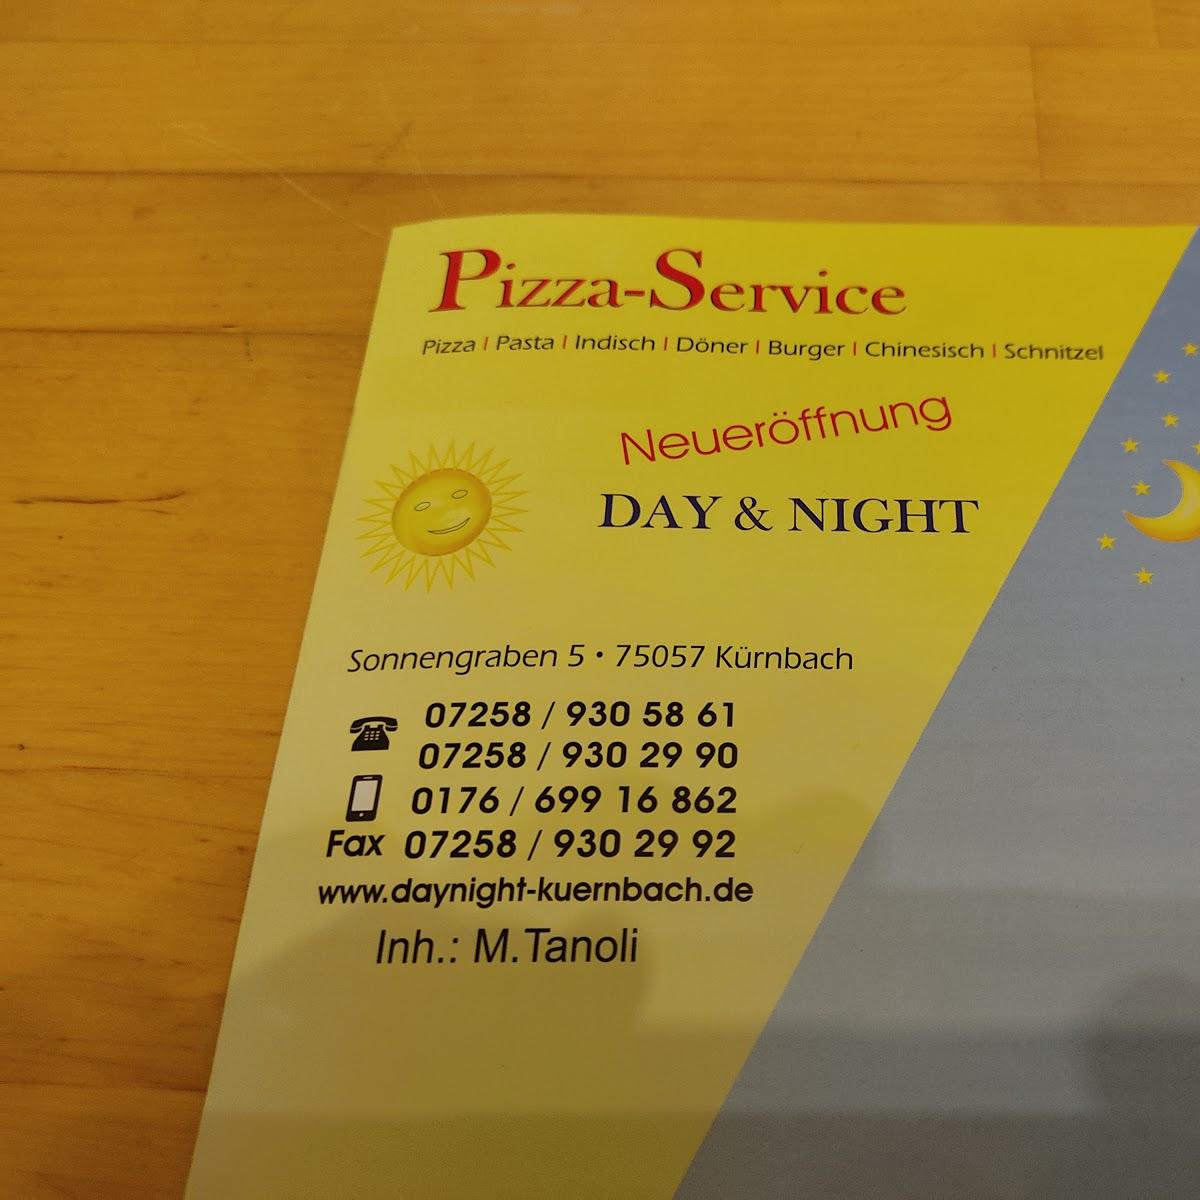 Restaurant "Day and Night Pizzaservice" in  Kürnbach